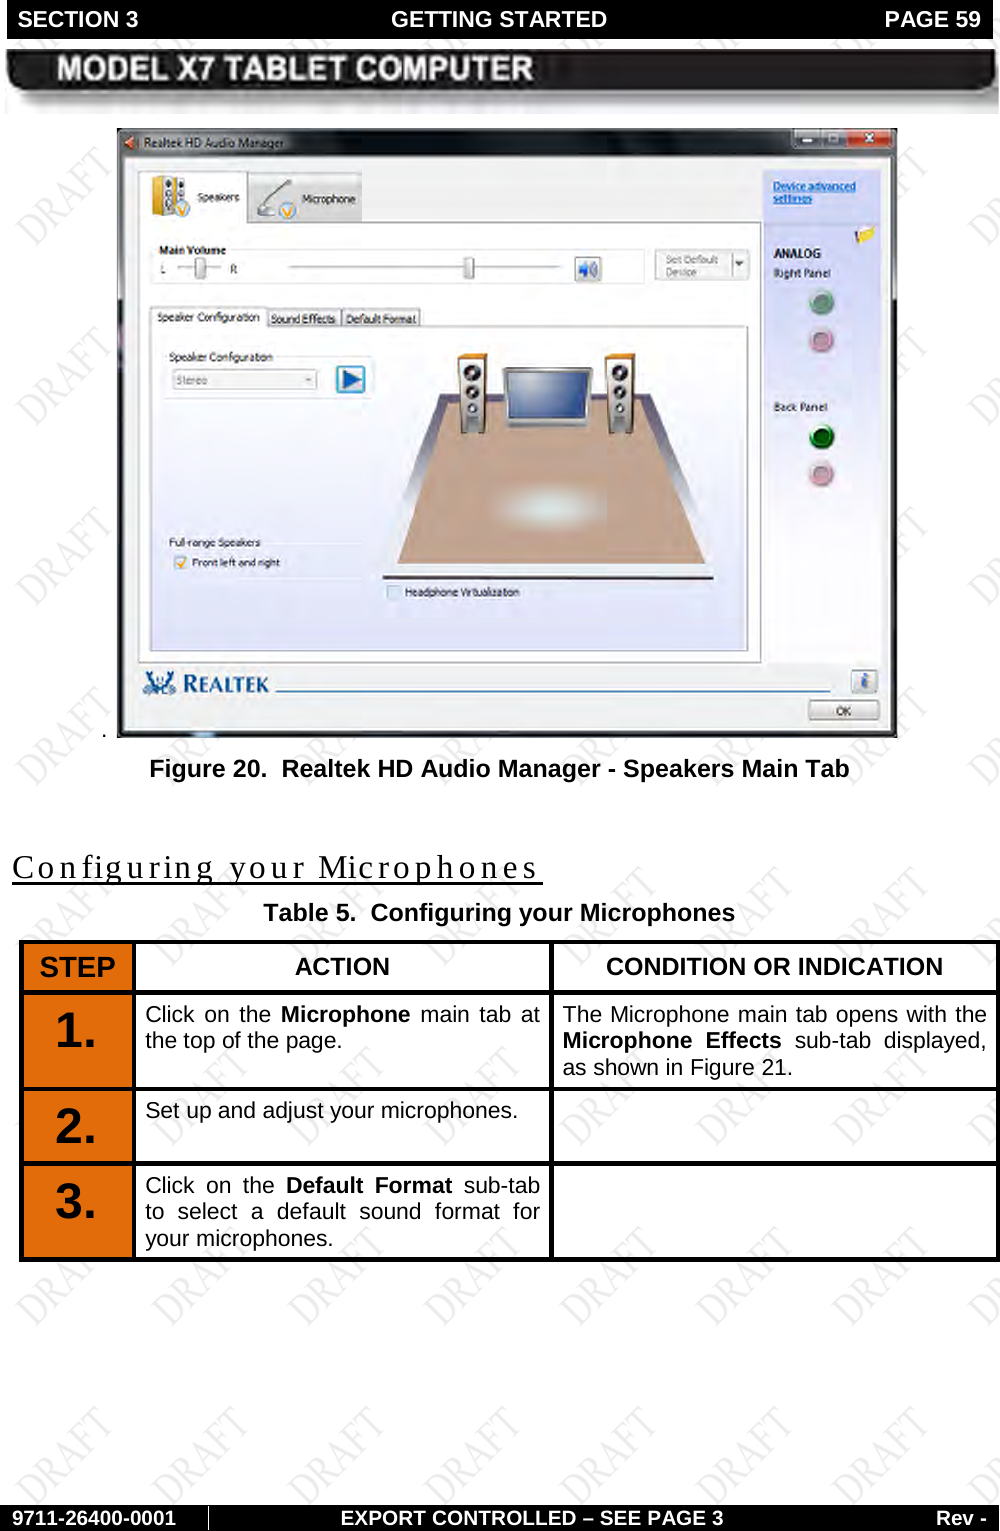 SECTION 3 GETTING STARTED  PAGE 59        9711-26400-0001 EXPORT CONTROLLED – SEE PAGE 3 Rev - .   Figure 20.  Realtek HD Audio Manager - Speakers Main Tab  Table 5.  Configuring your Microphones Configuring your Microphones STEP  ACTION CONDITION OR INDICATION 1.   Click on the Microphone main tab at the top of the page. The Microphone main tab opens with the Microphone Effects sub-tab displayed, as shown in Figure 21. 2.  Set up and adjust your microphones.   3.   Click on the Default Format sub-tab to select a default sound format for your microphones.   